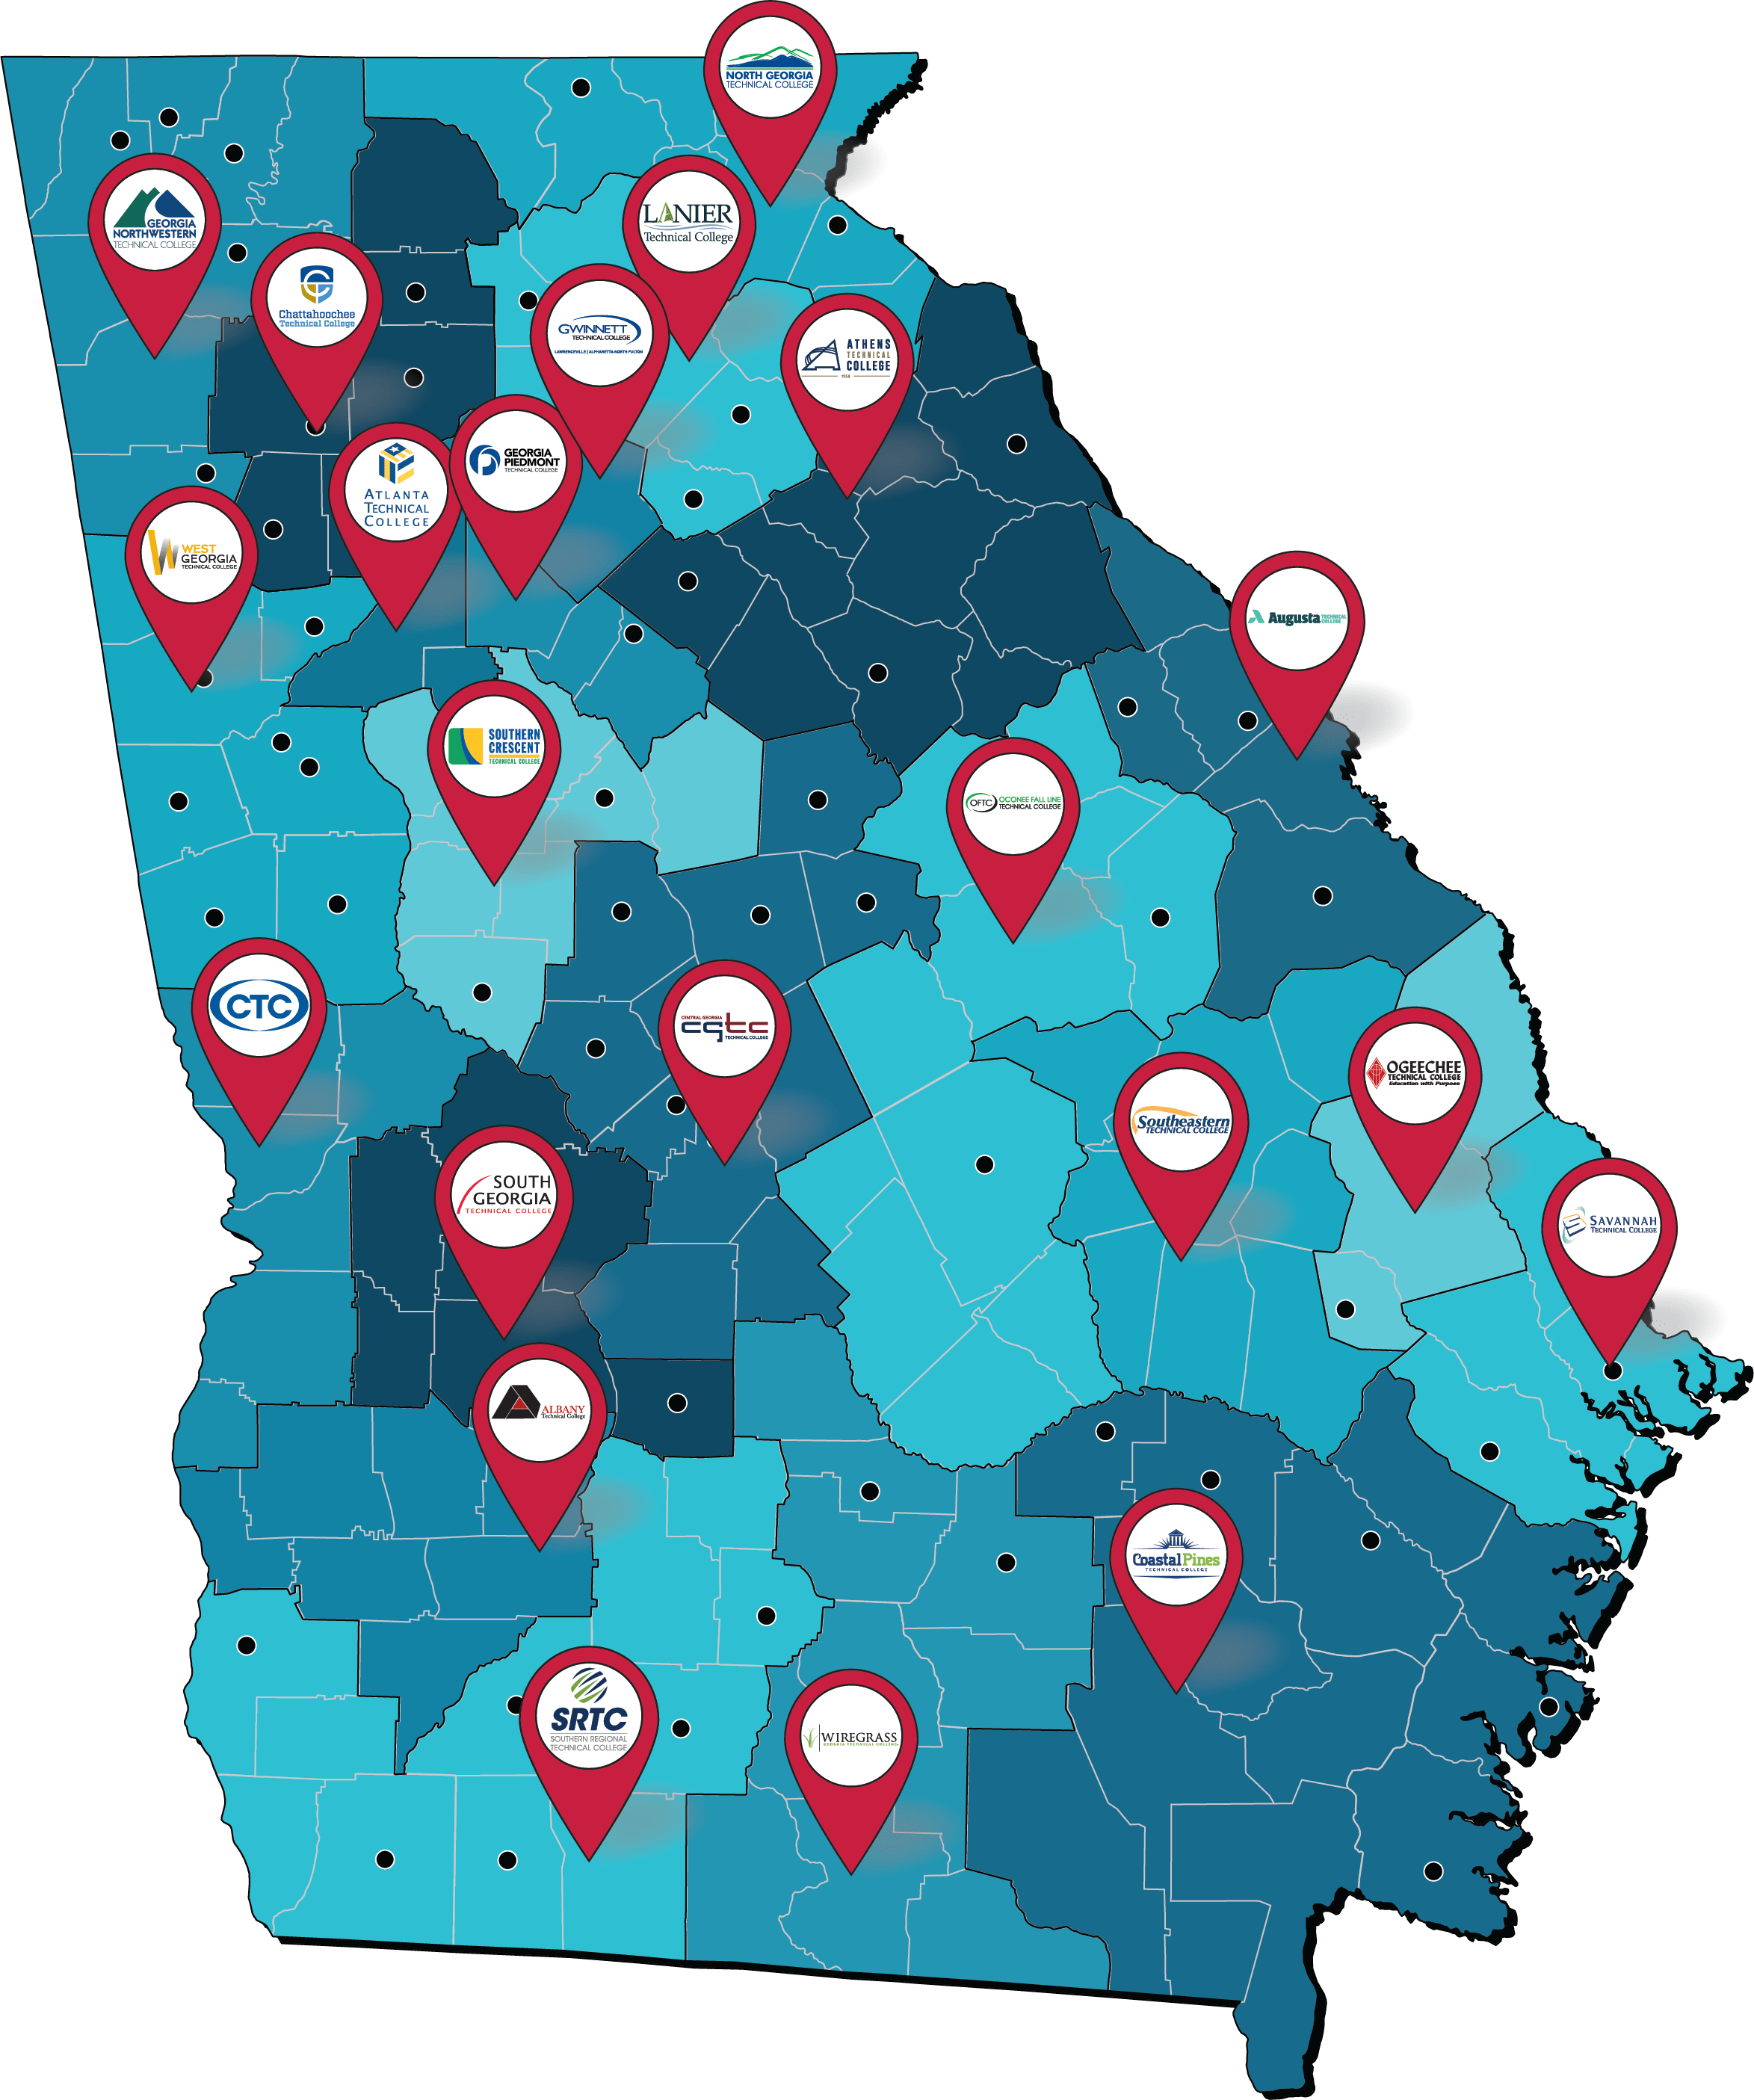 State of GA image with all college locations